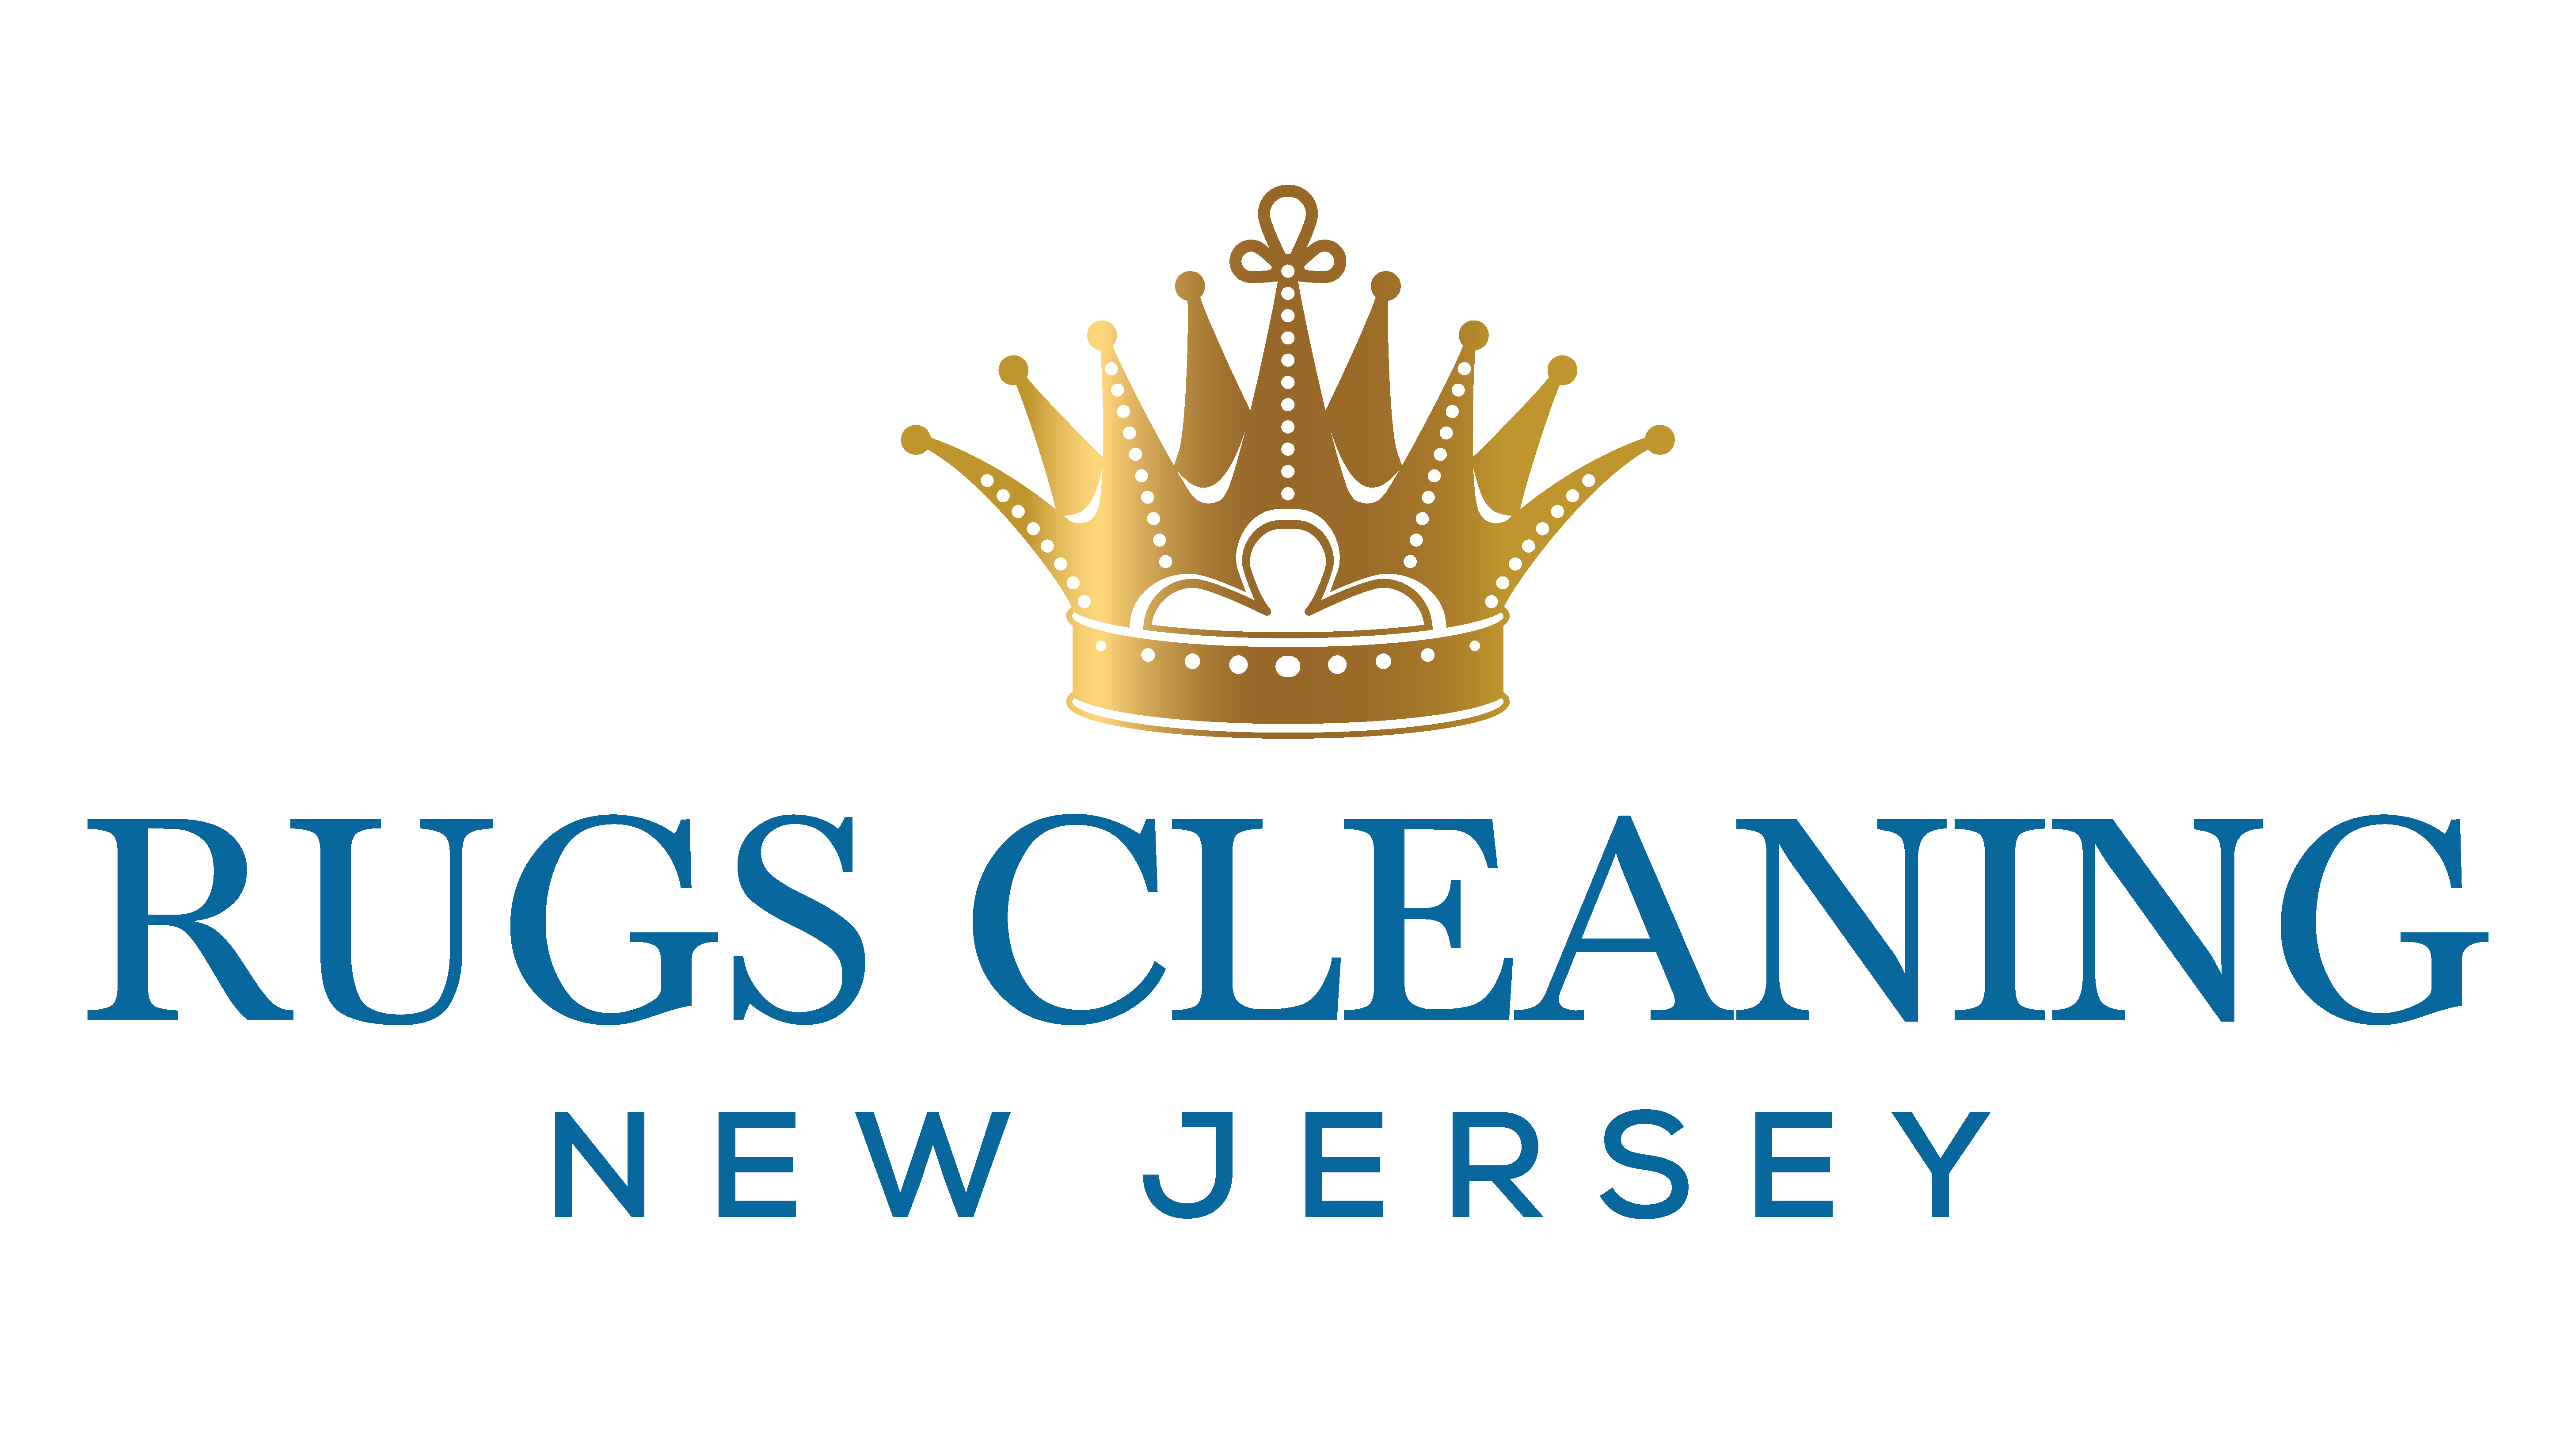 Rugs Cleaning New Jersey